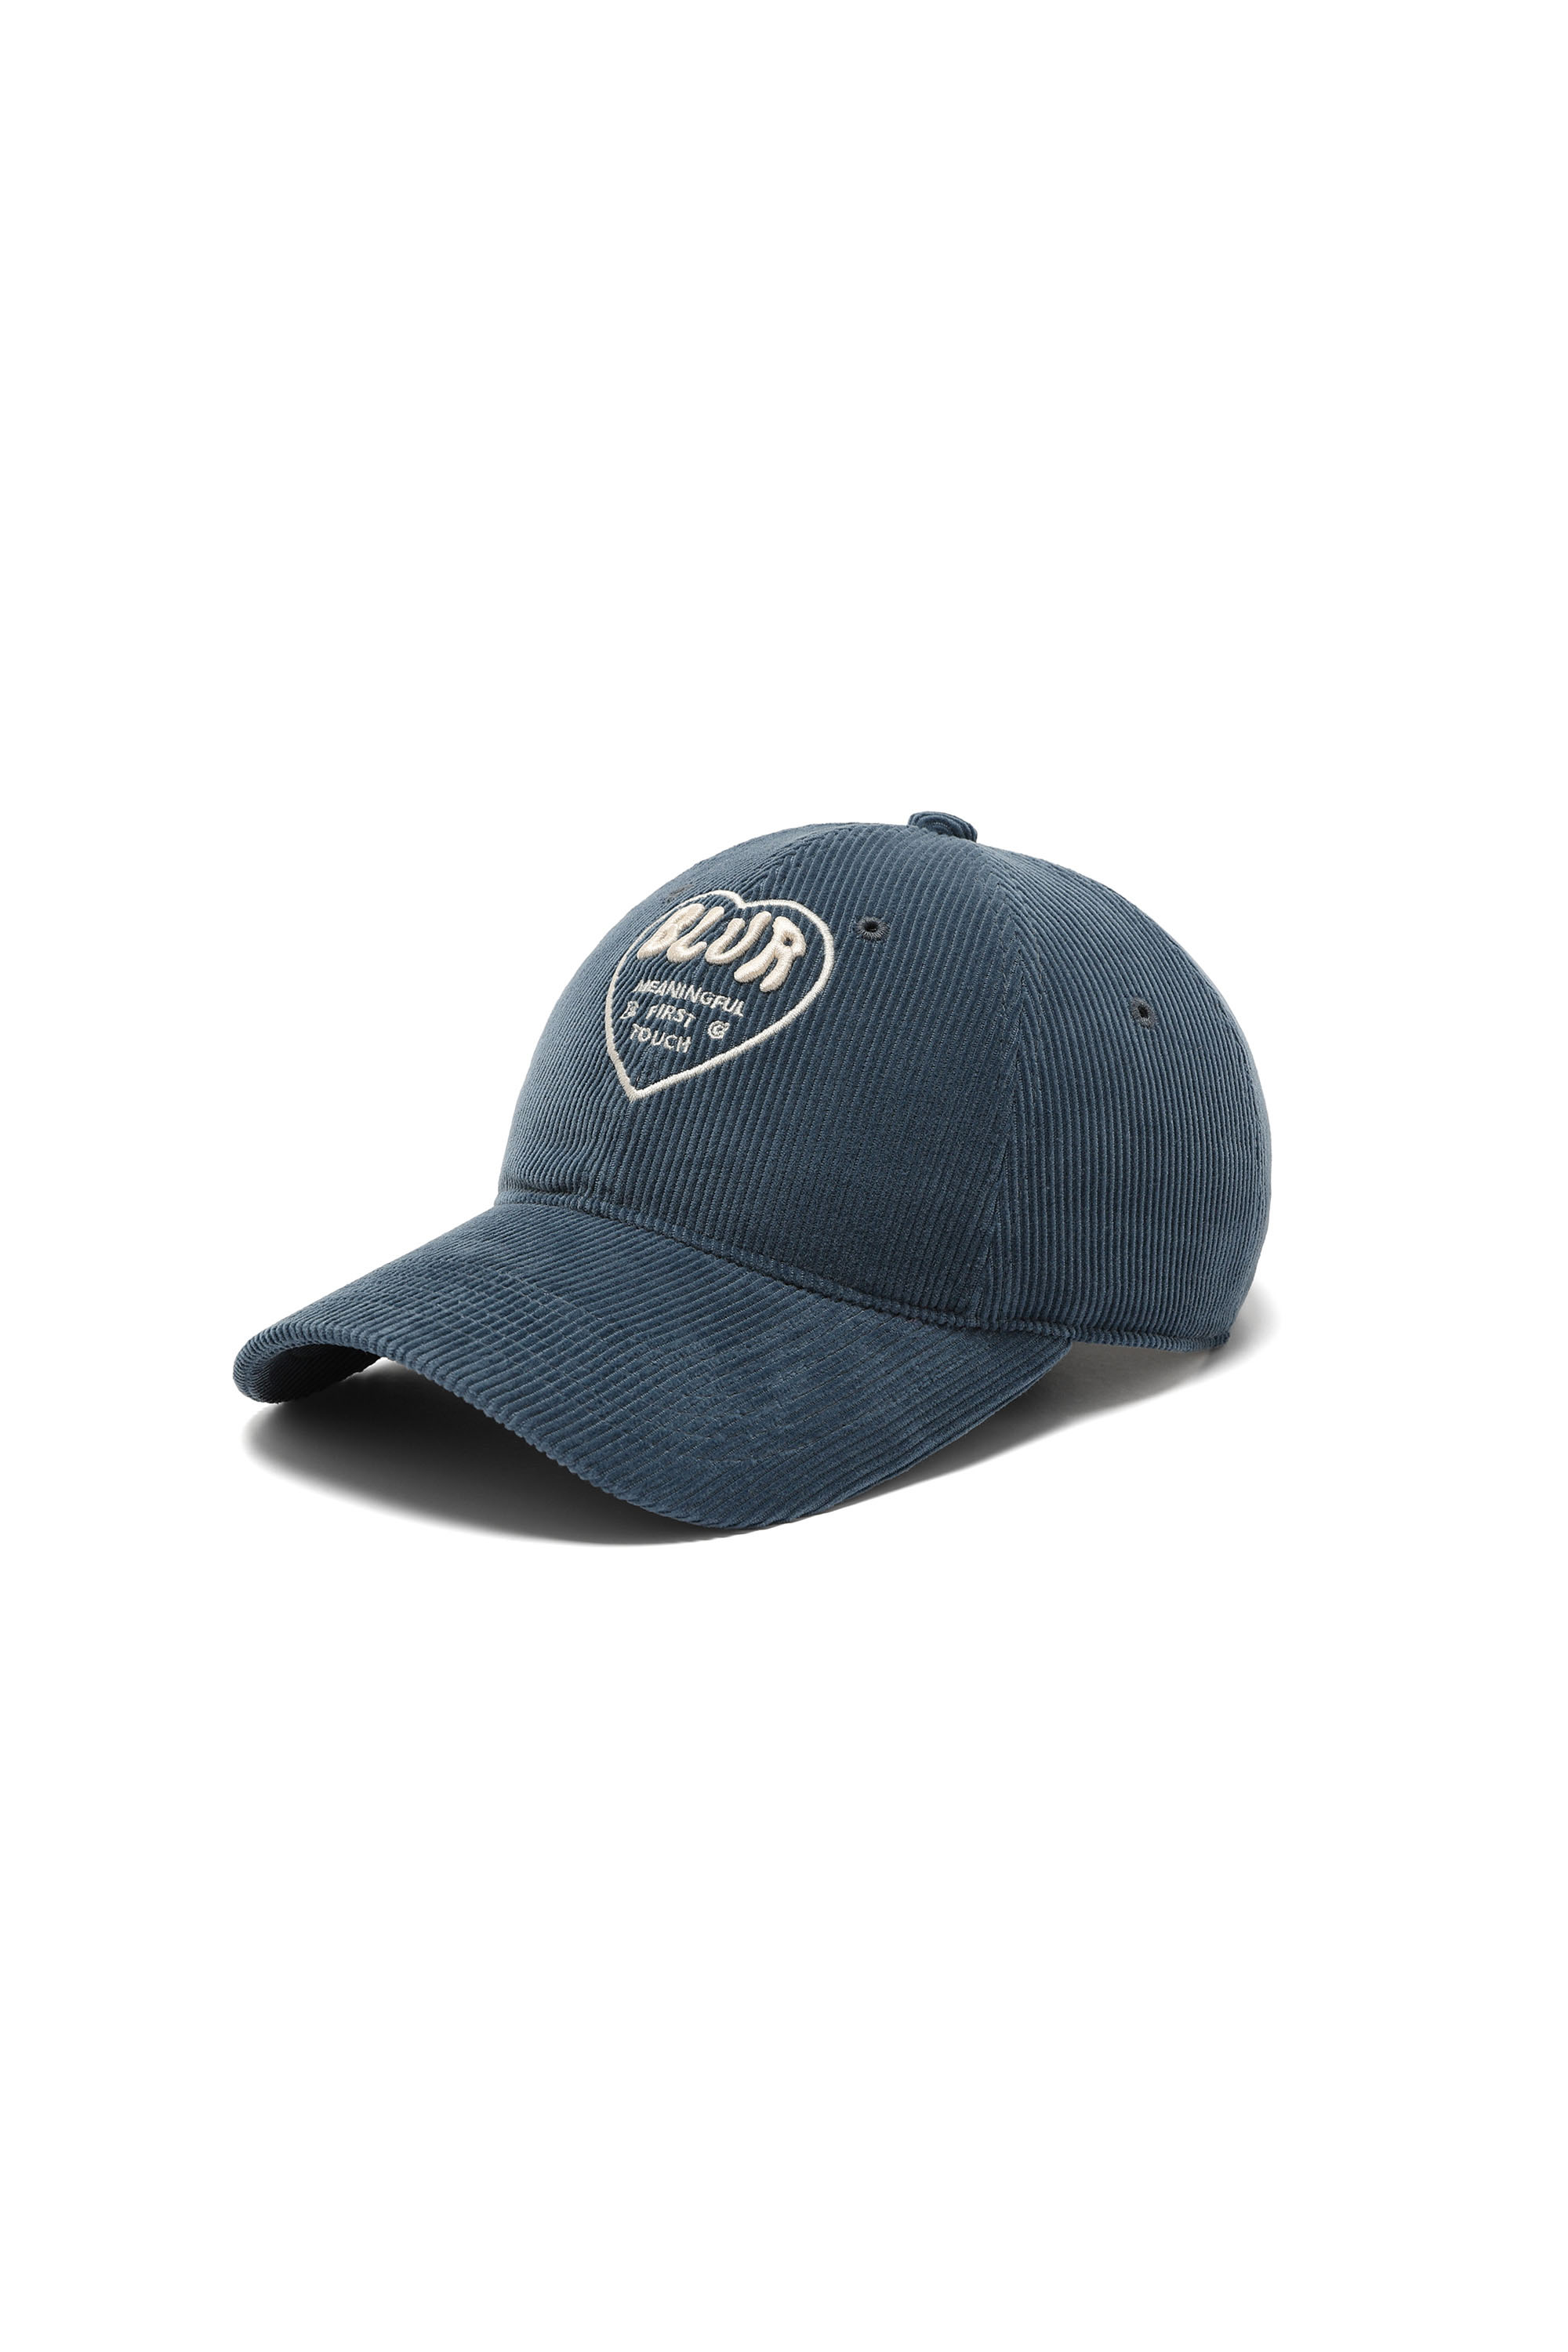 HEART EMBROIDERED CORDUROY CAP - BLUE